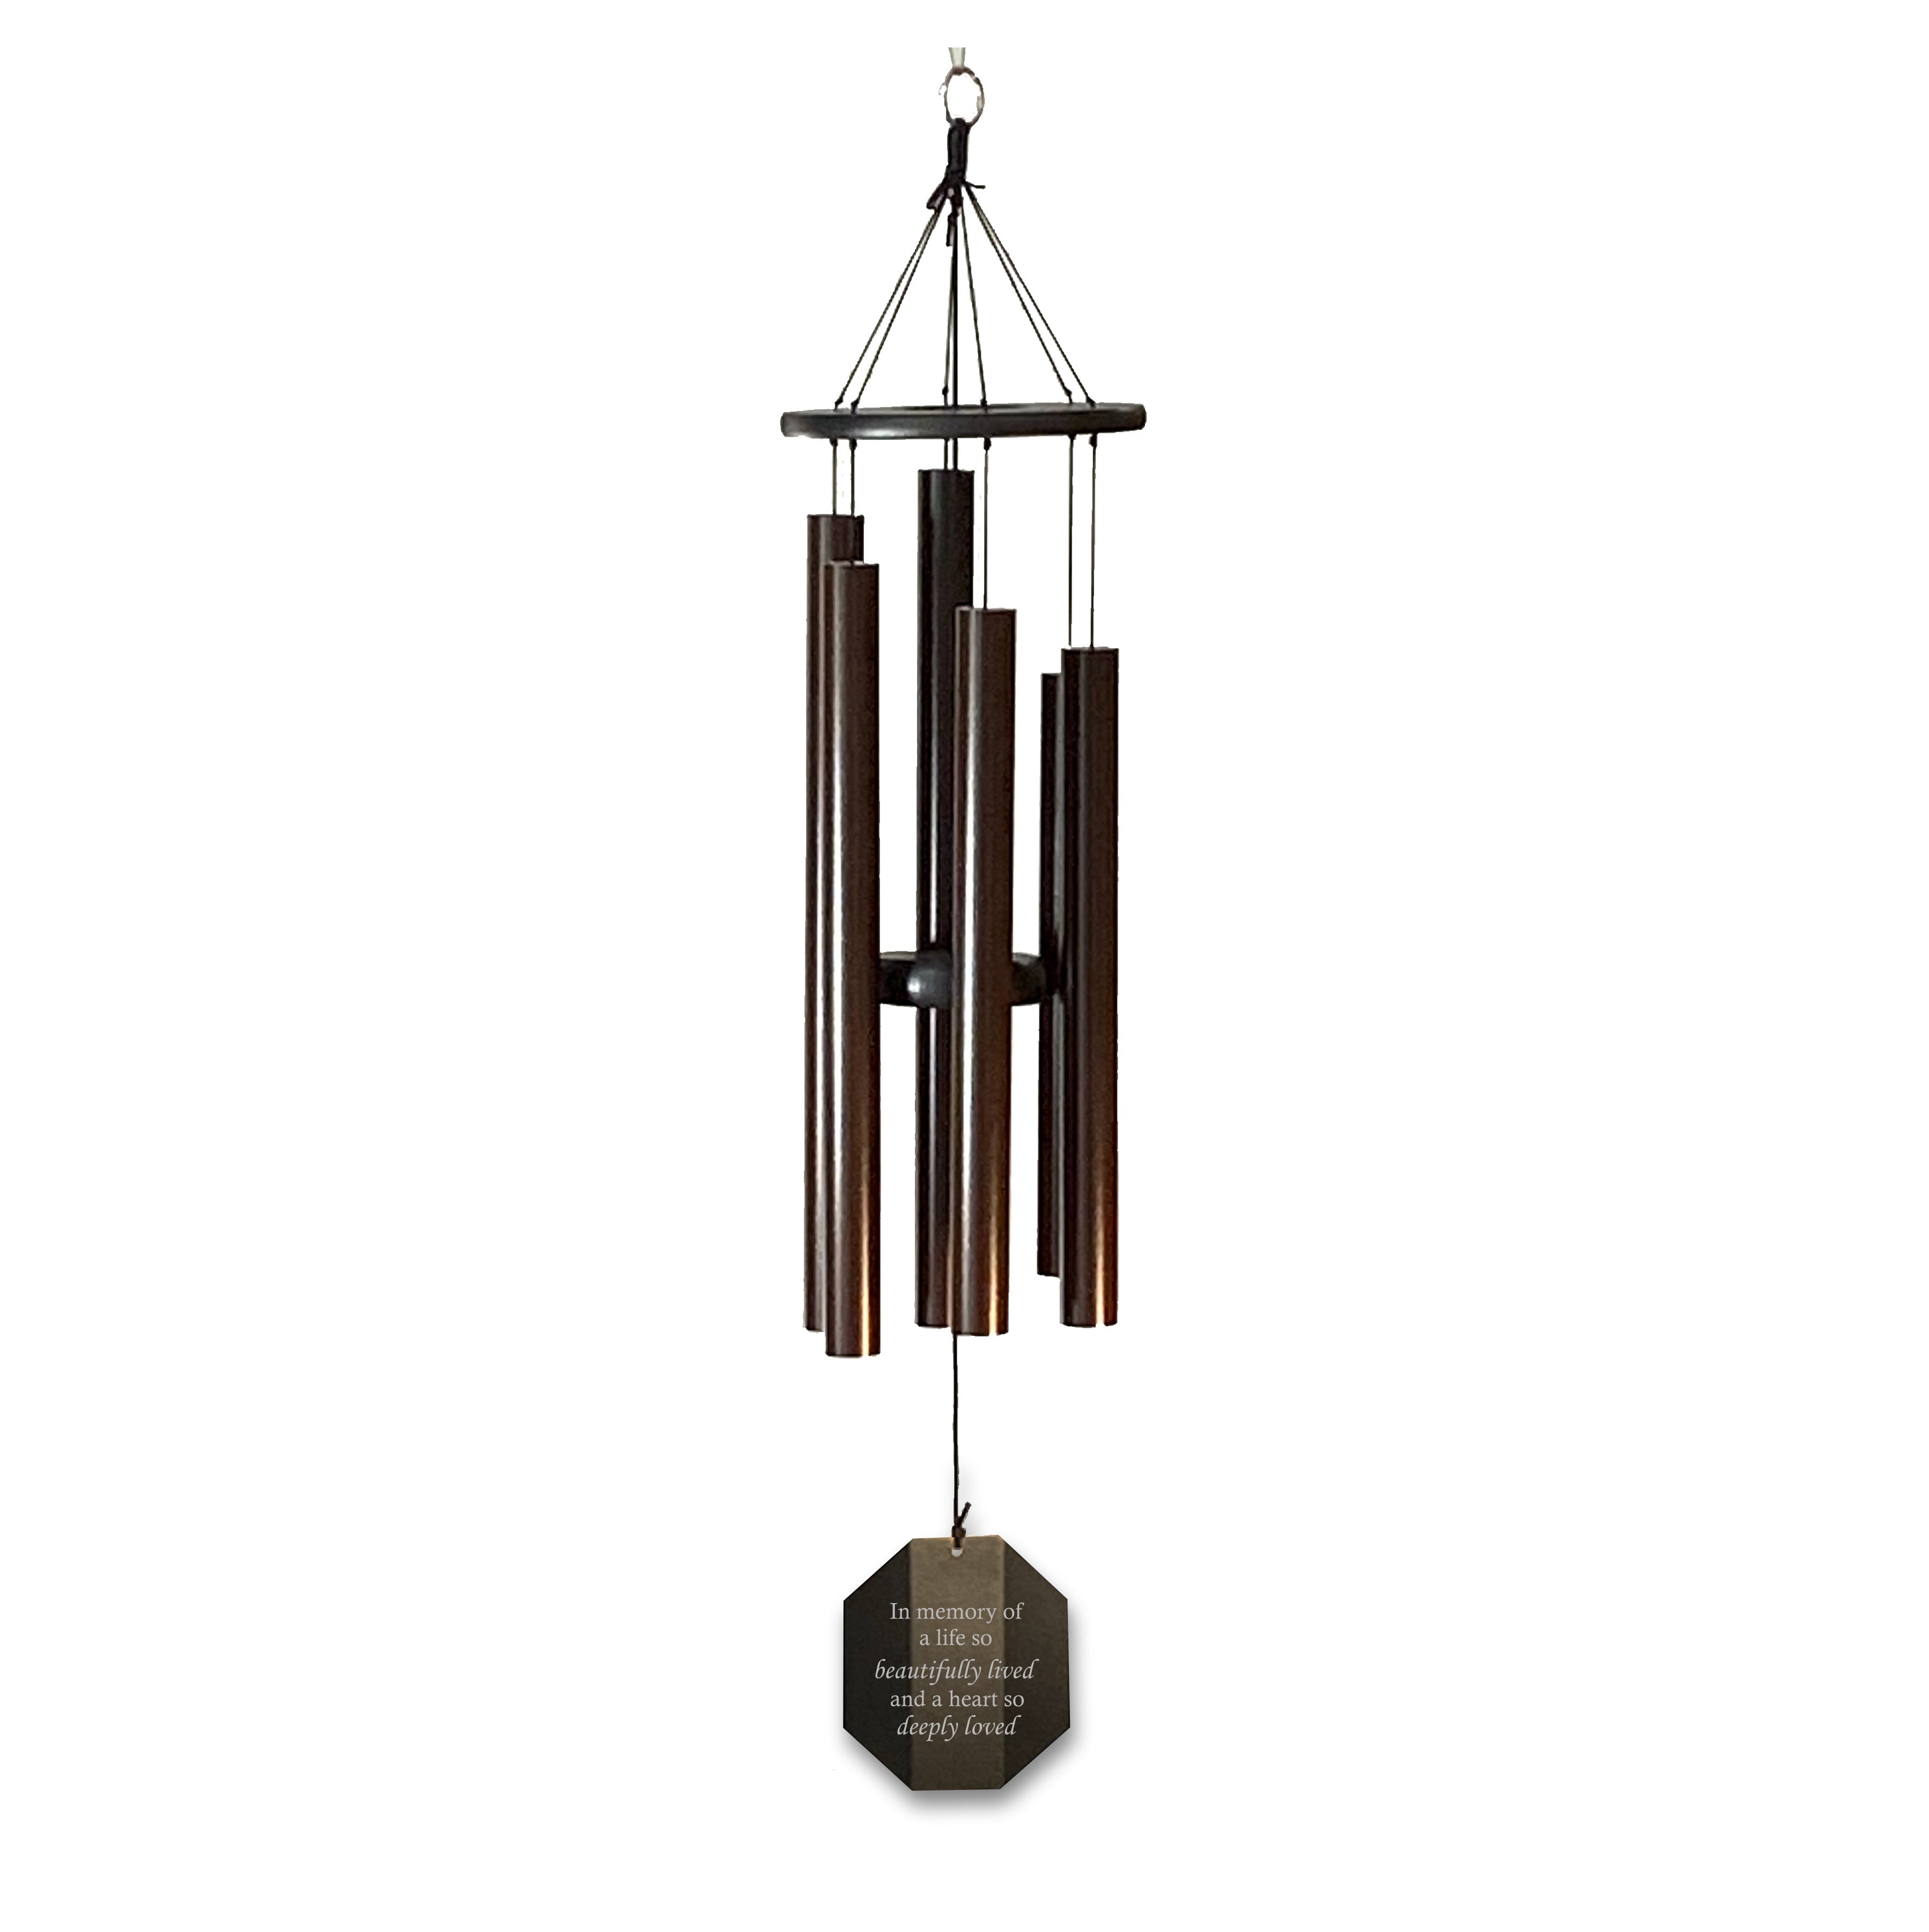 Memorial Wind Chime | A life so beautifully lived | Amish Large Chime